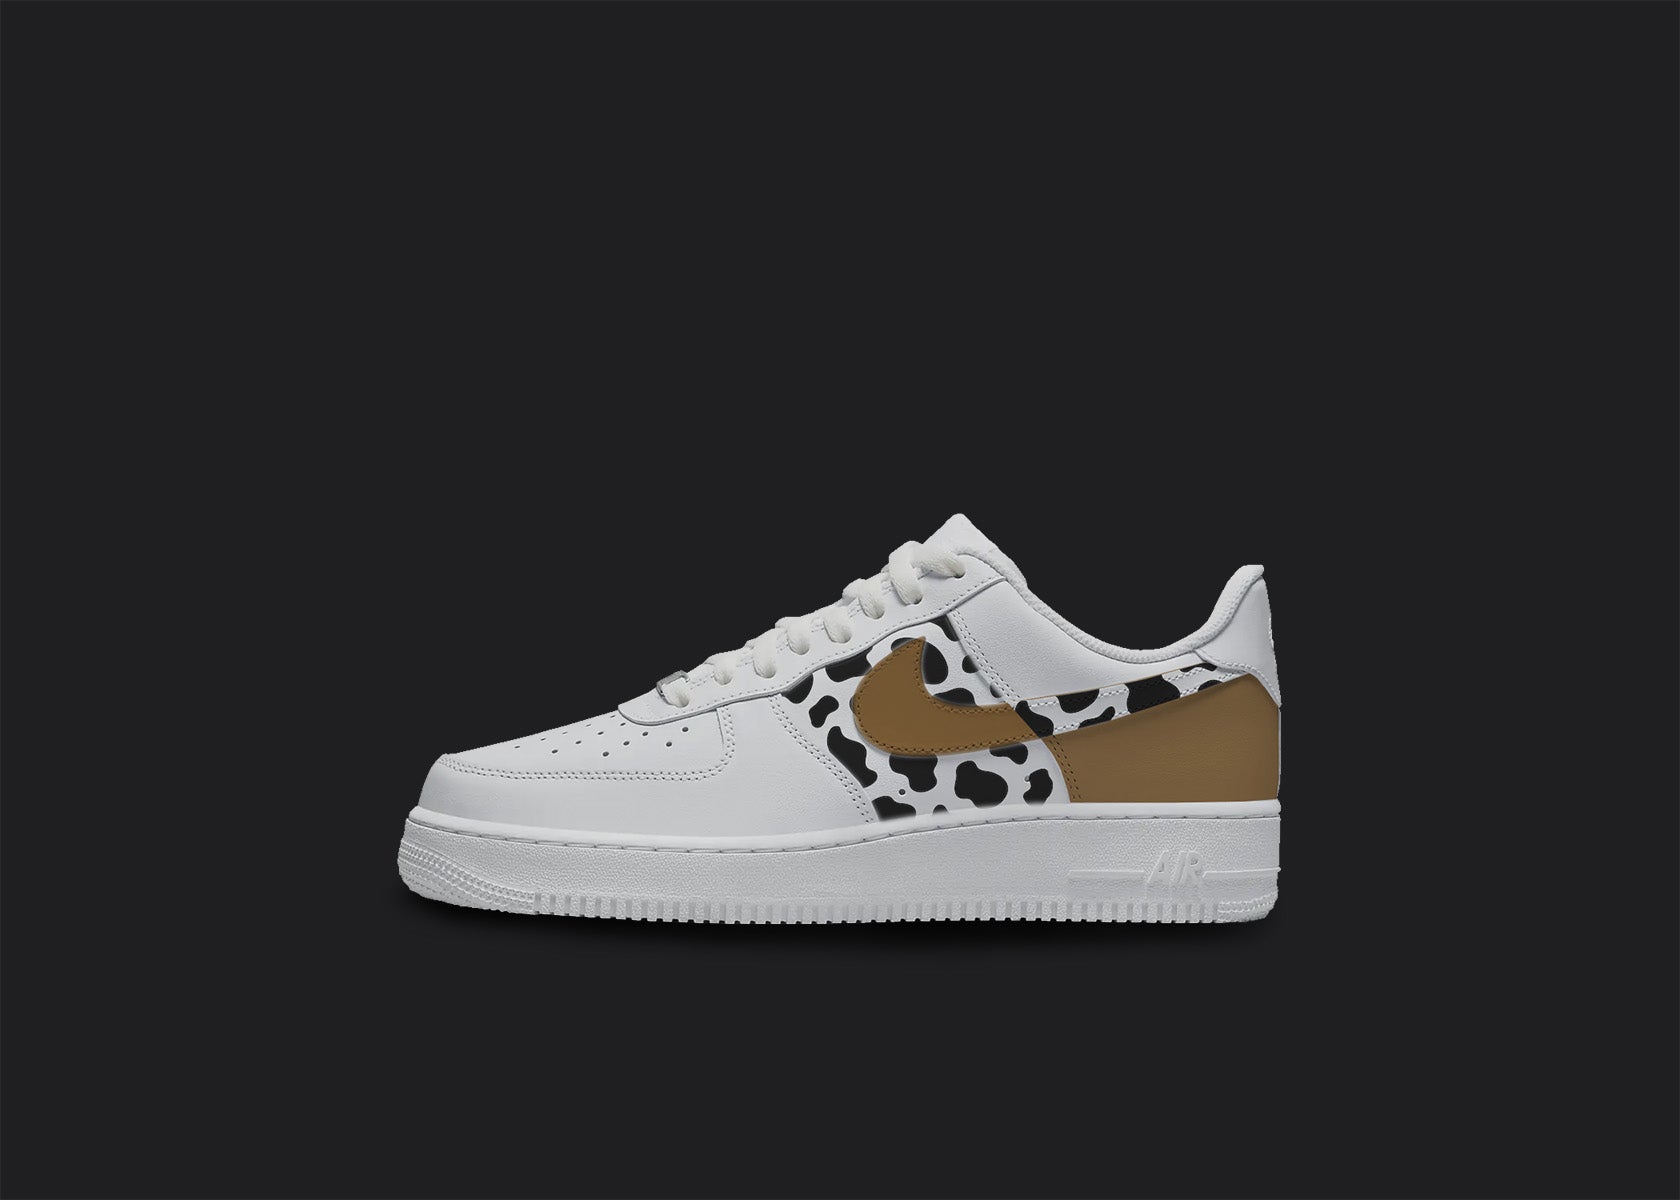 The image is featuring a Custom Nike Air force 1 sneakers on a blank black background. The sections of the custom sneaker are painted in a brown and black cow print.